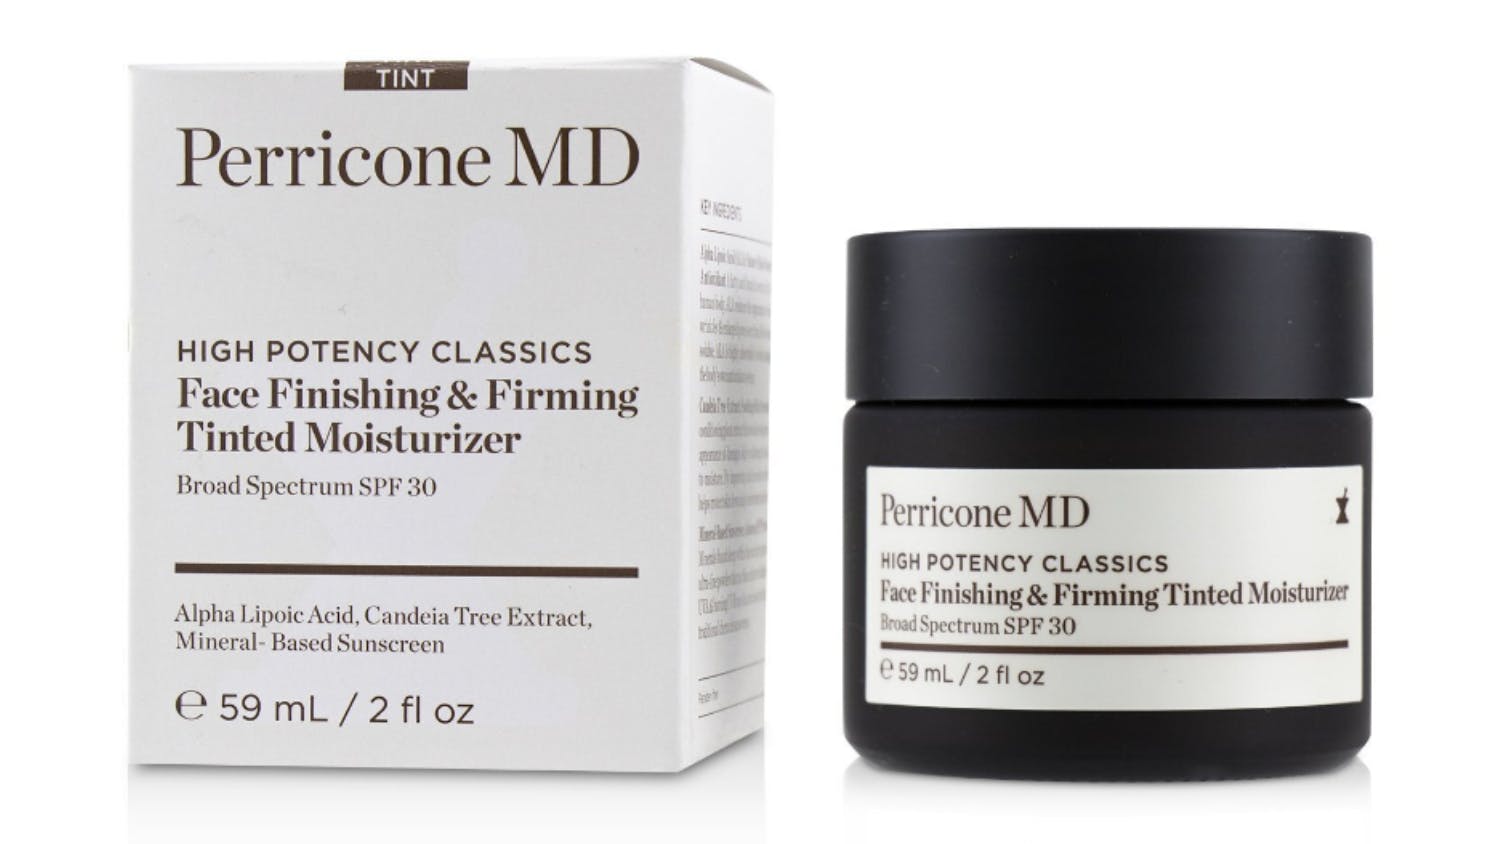 Perricone MD High Potency Classics Face Finishing & Firming Tinted Moisturizer SPF 30 - 59ml/2oz